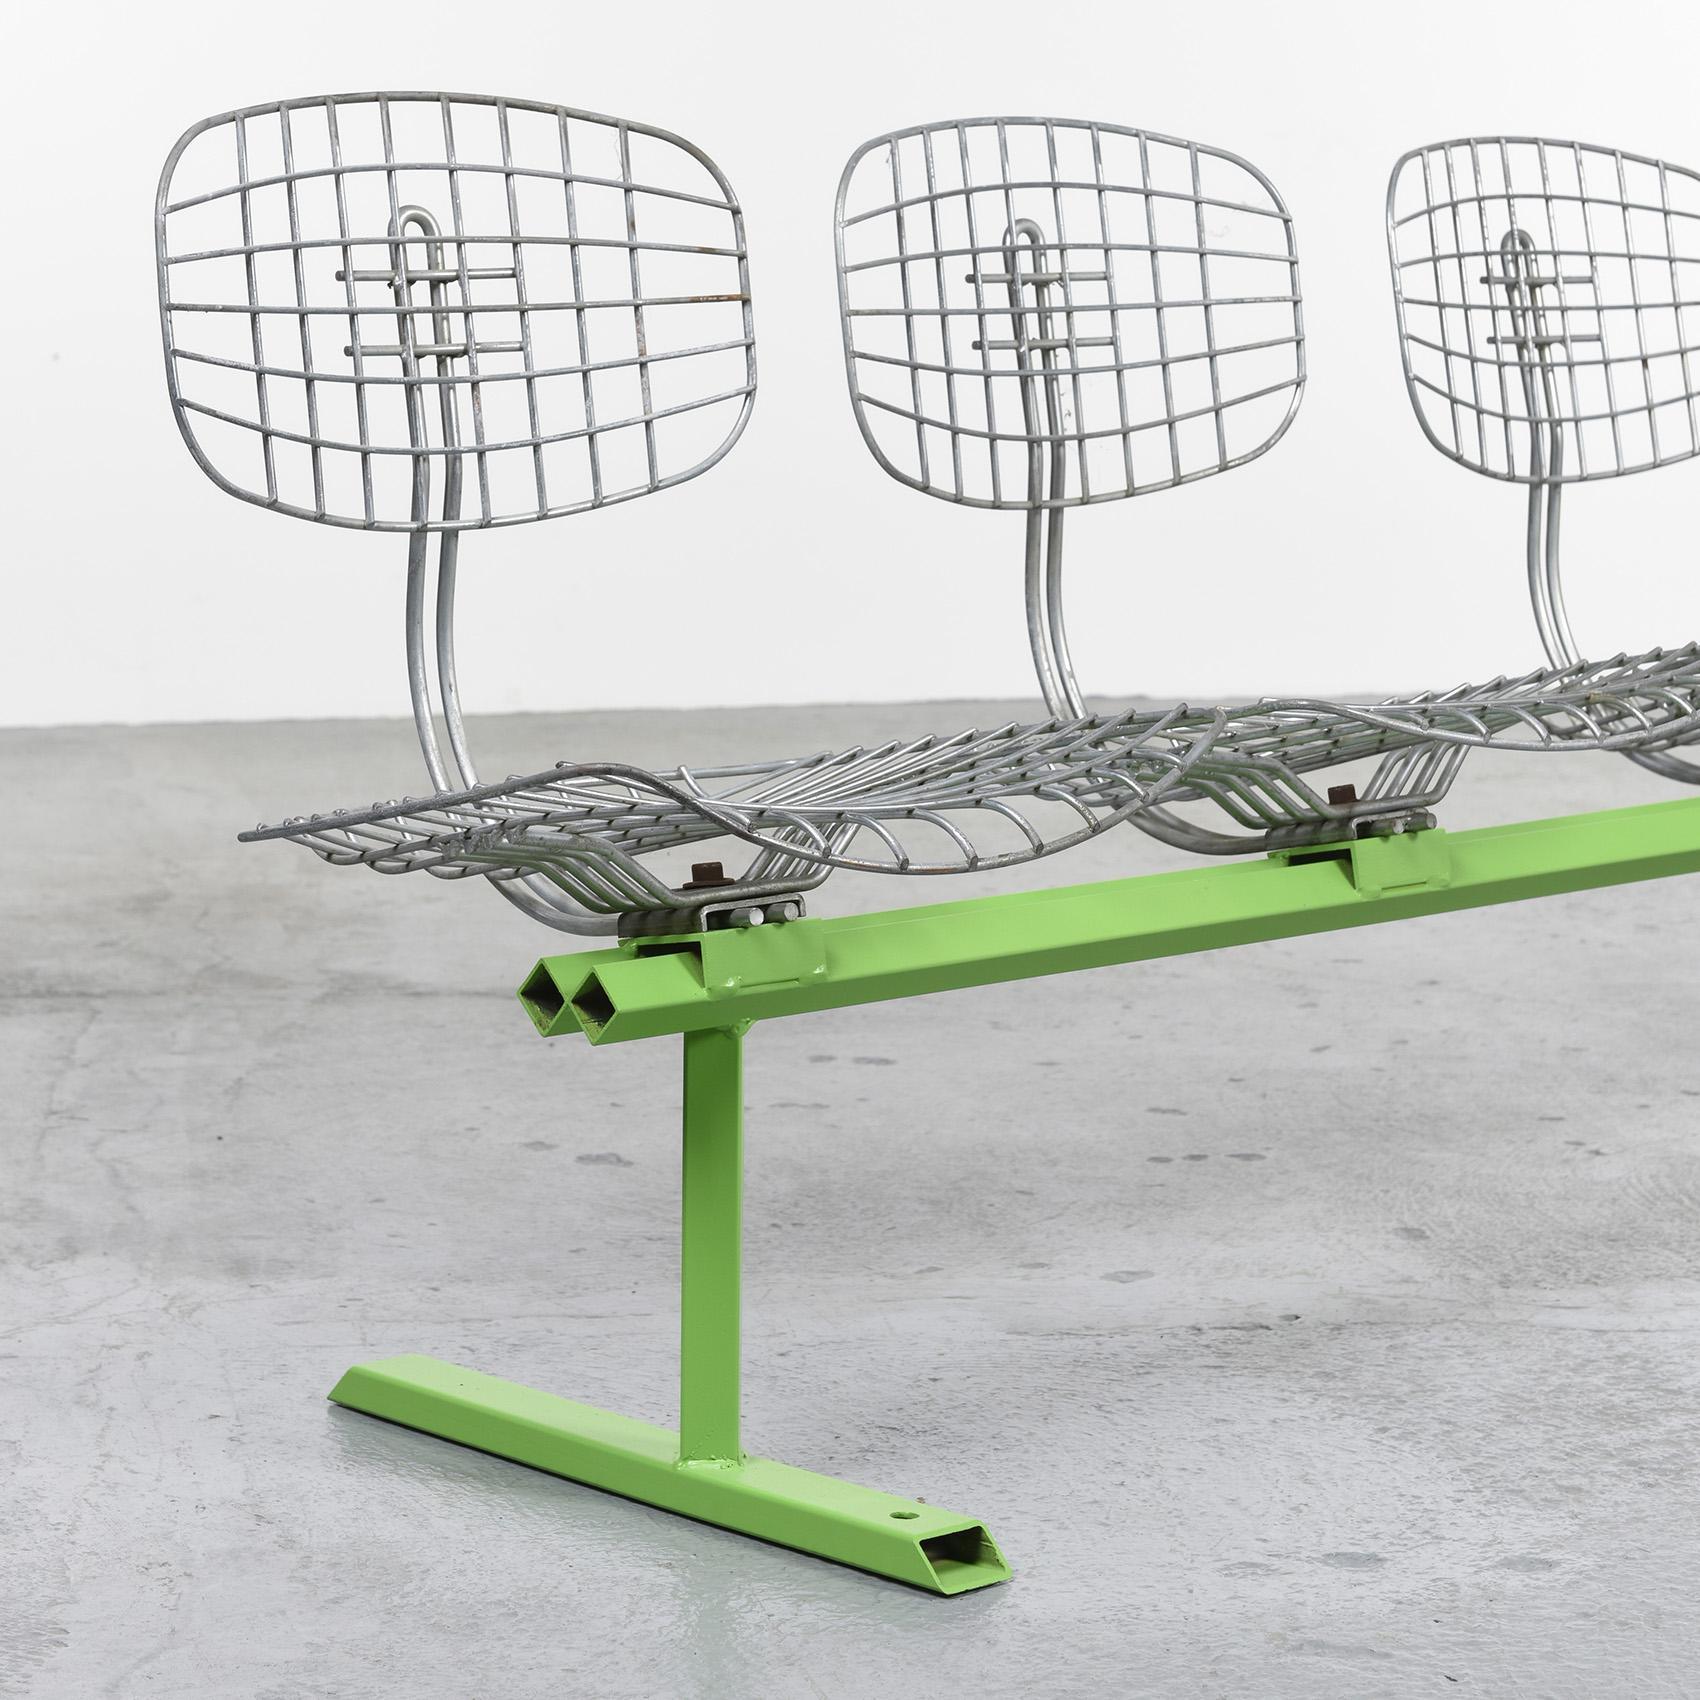 20th Century Michel Cadestin: Beaubourg Bench with 4 Seats, 1974